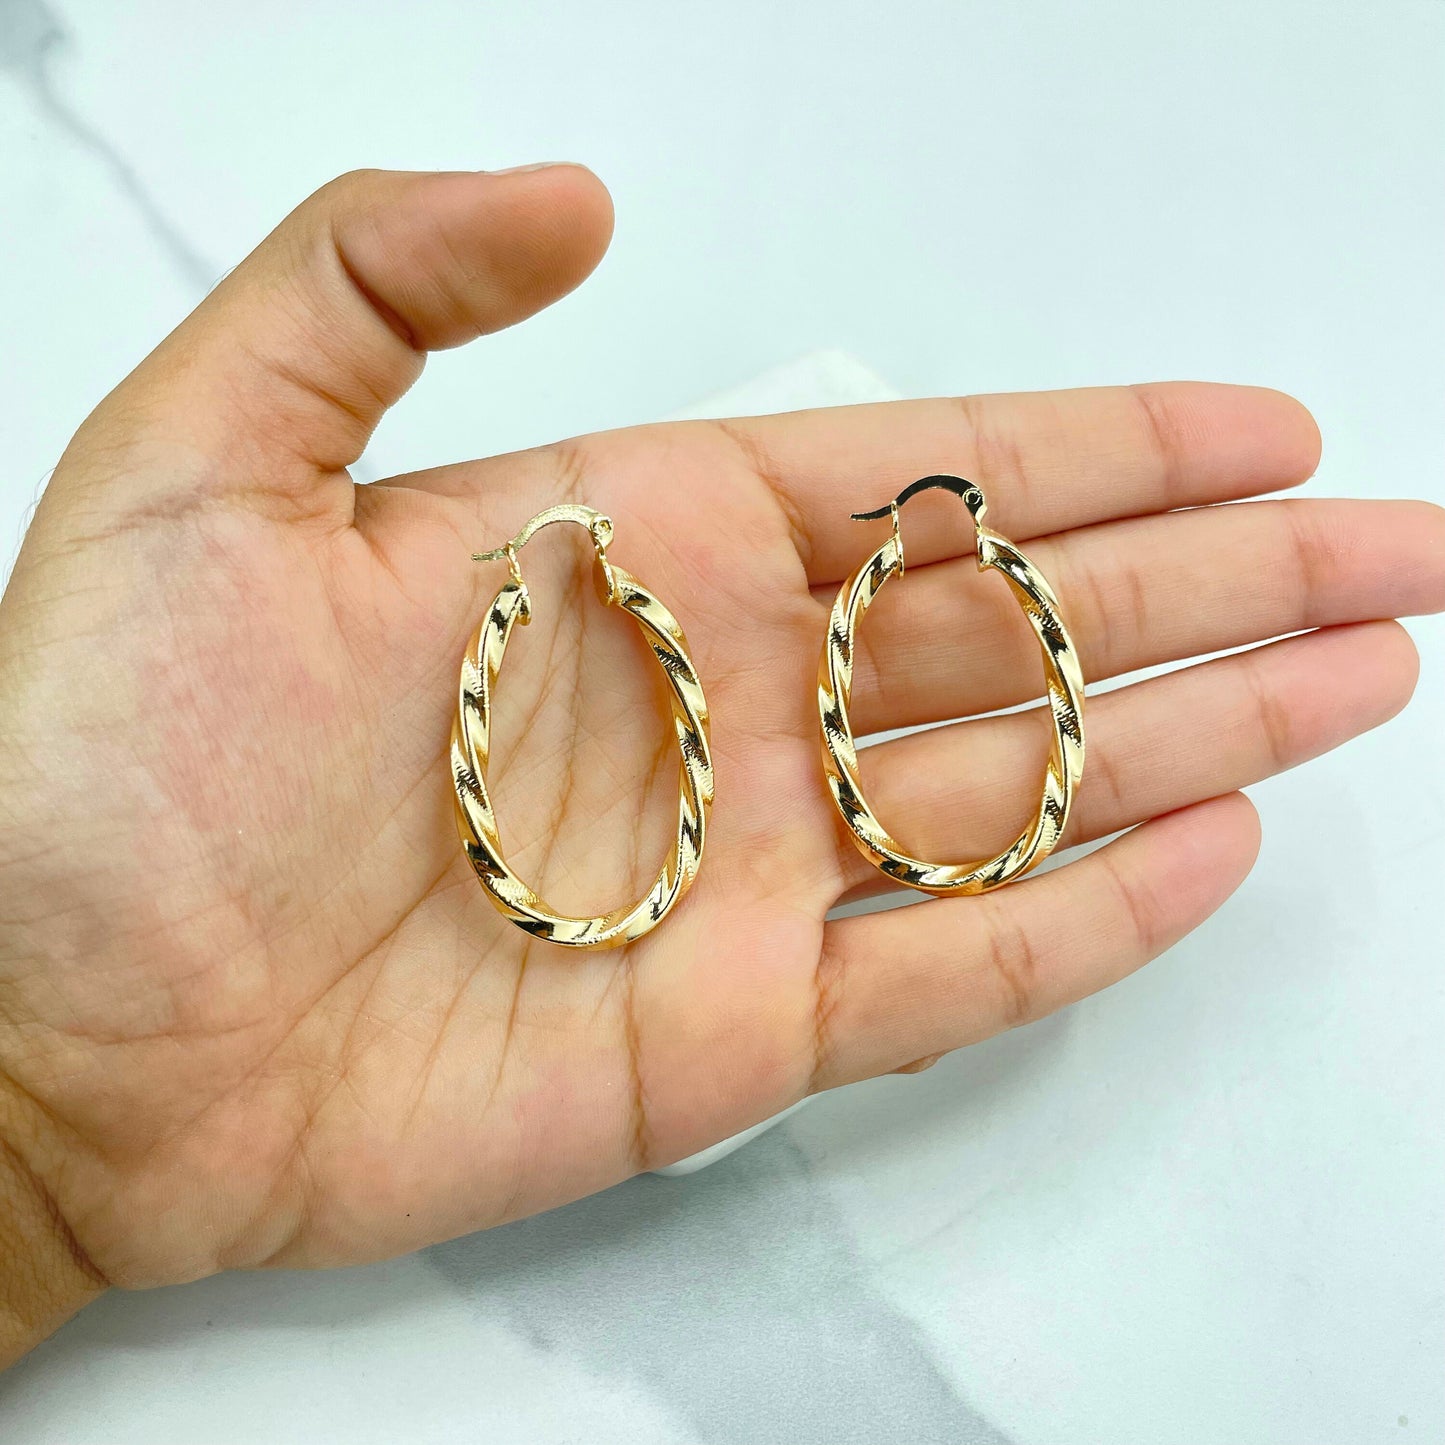 18k Gold Filled 28mm Twisted & Texturized Oval Design Hoops Earrings, Wholesale Jewelry Making Supplies